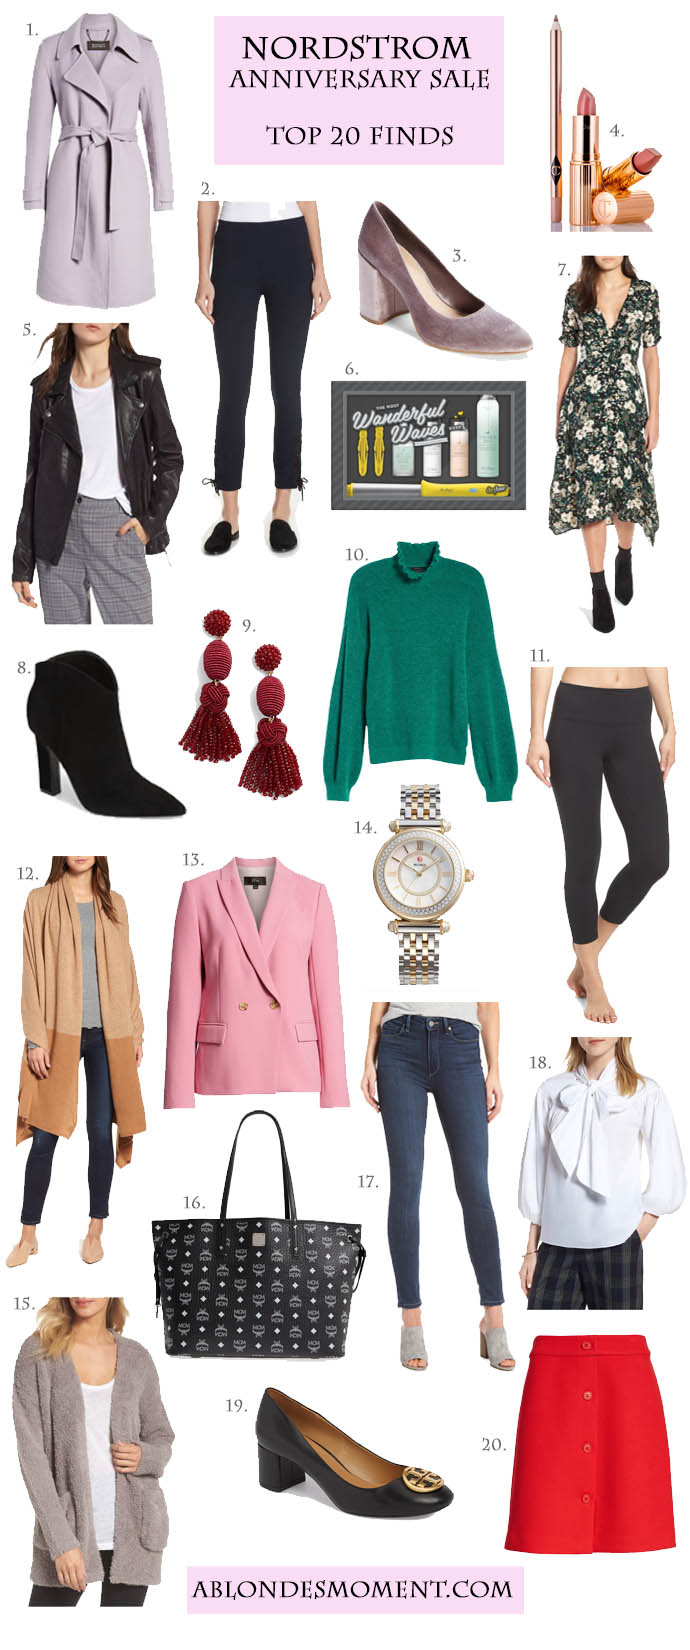 top 20 finds at the nordstrom anniversary sale